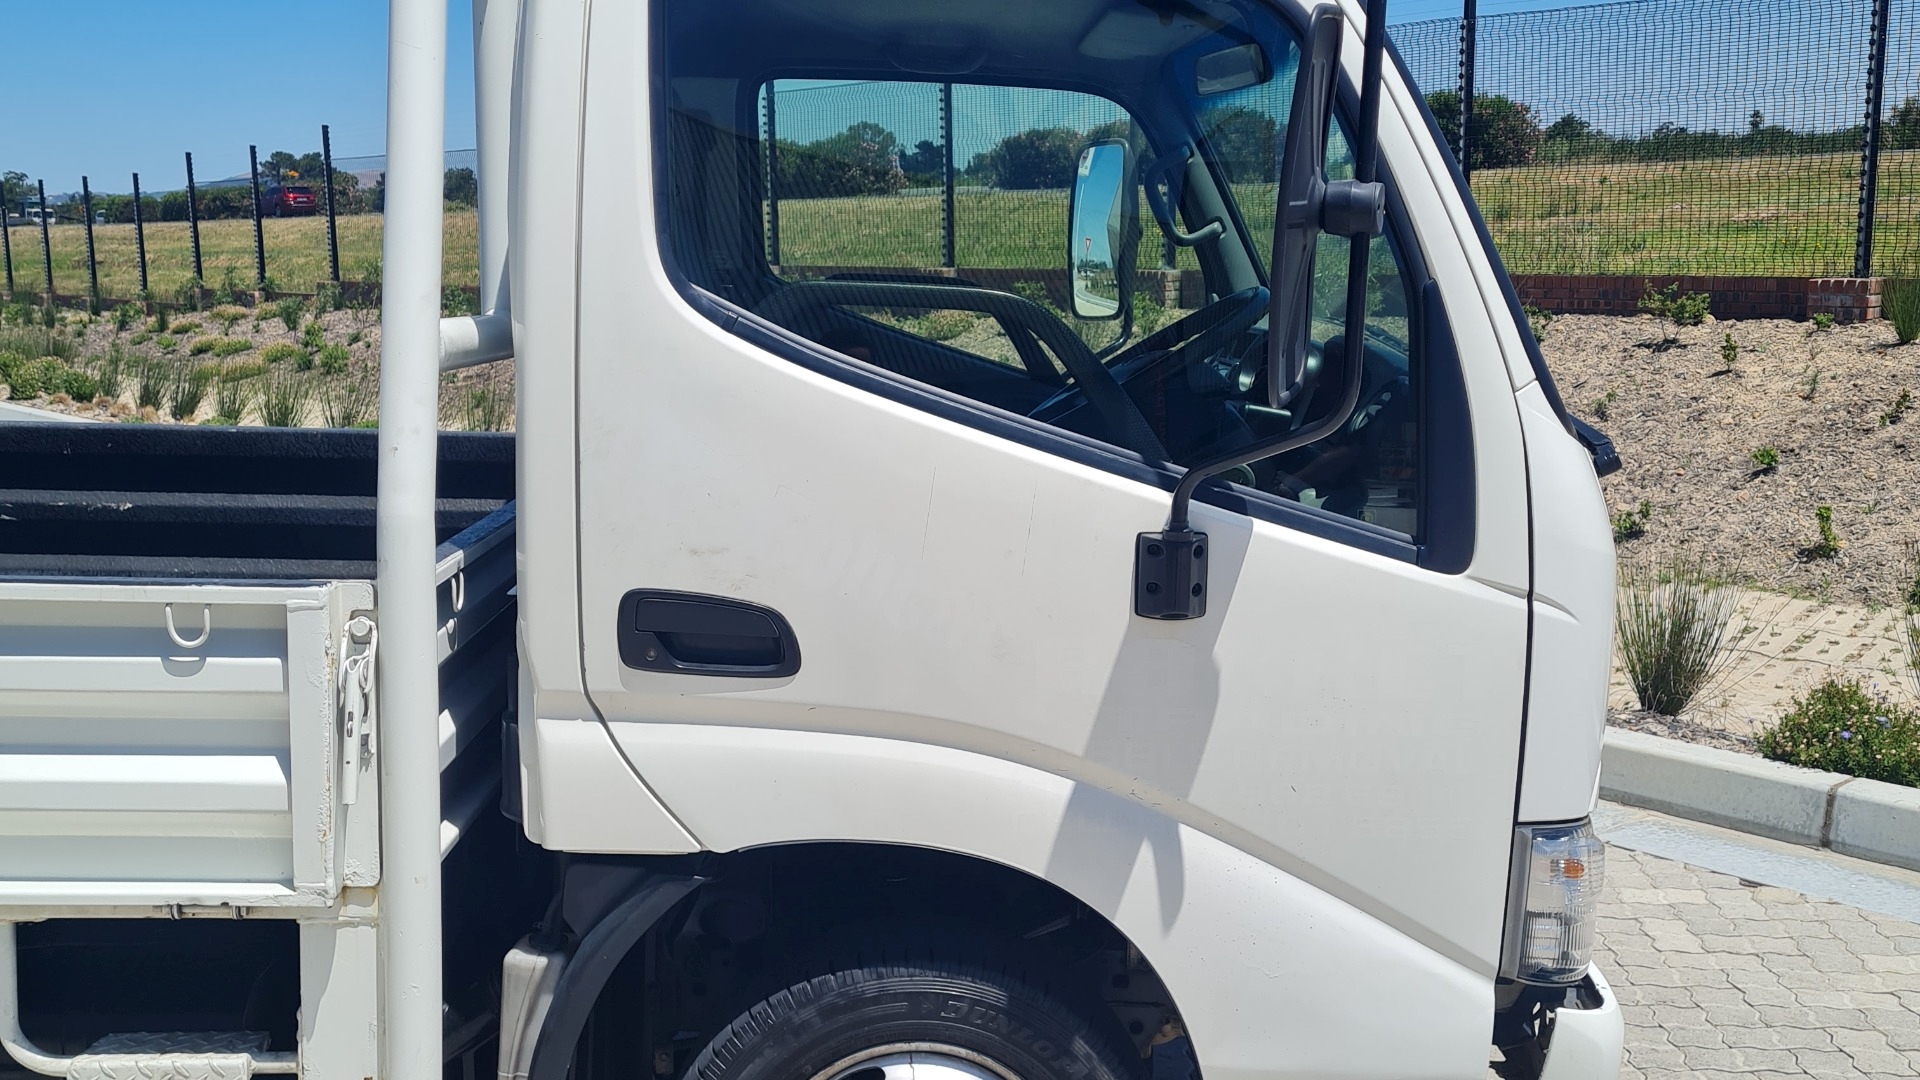 Toyota Dropside trucks 2019 Toyota Dyna Dropside Truck 2019 for sale by UD Trucks Cape Town | Truck & Trailer Marketplace